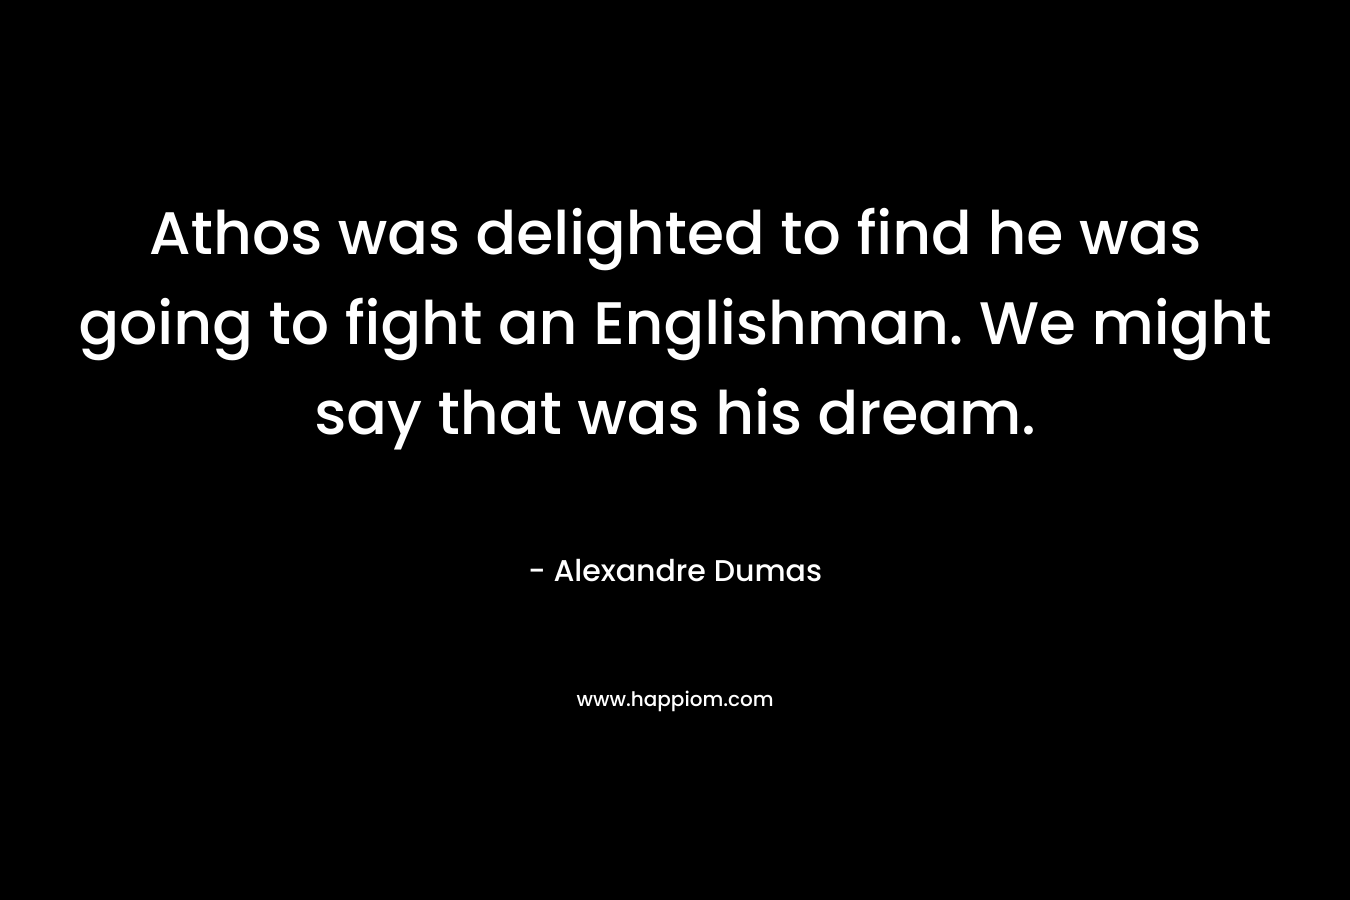 Athos was delighted to find he was going to fight an Englishman. We might say that was his dream.